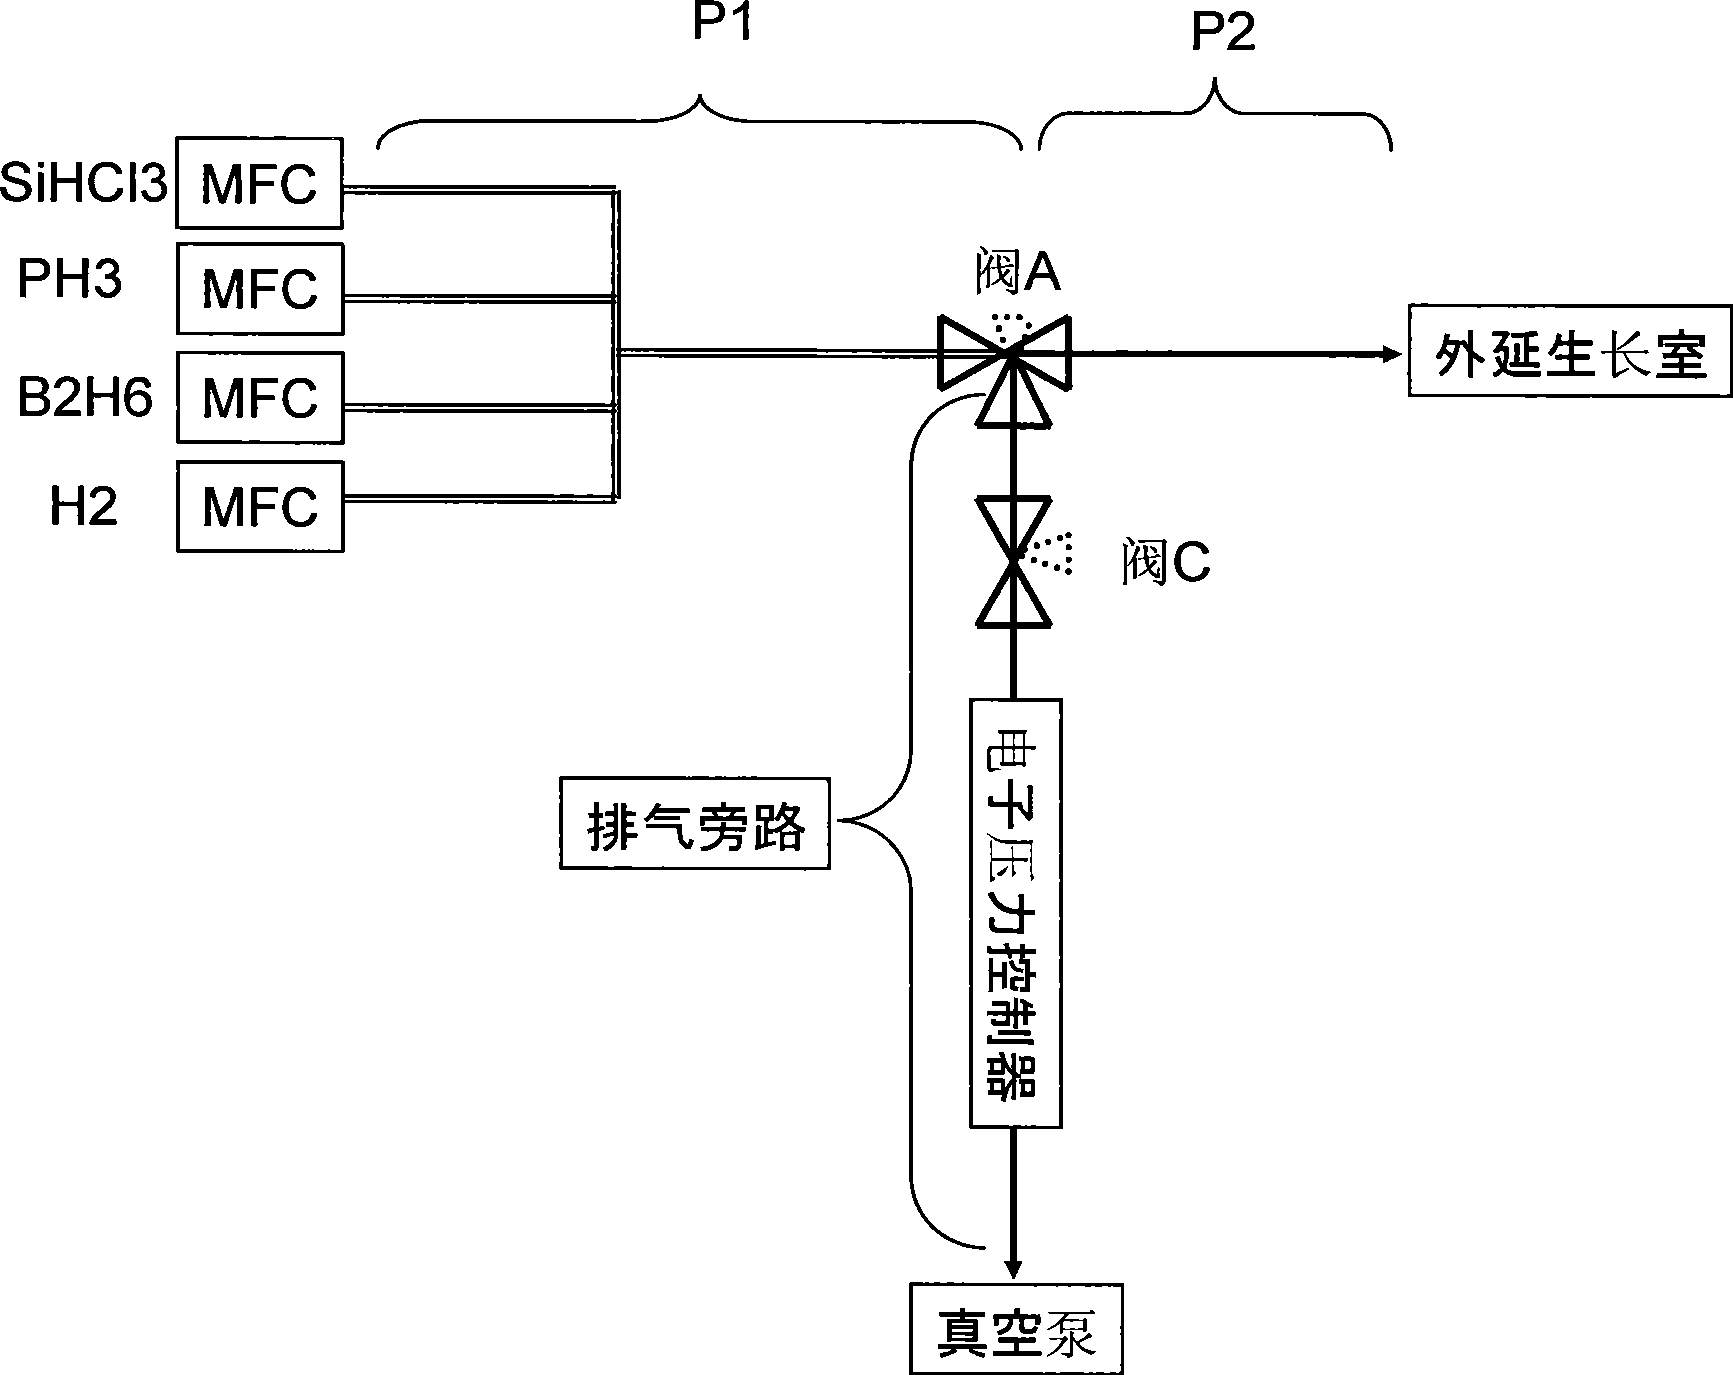 Active gas flow control device for growing silicon epitaxy layer